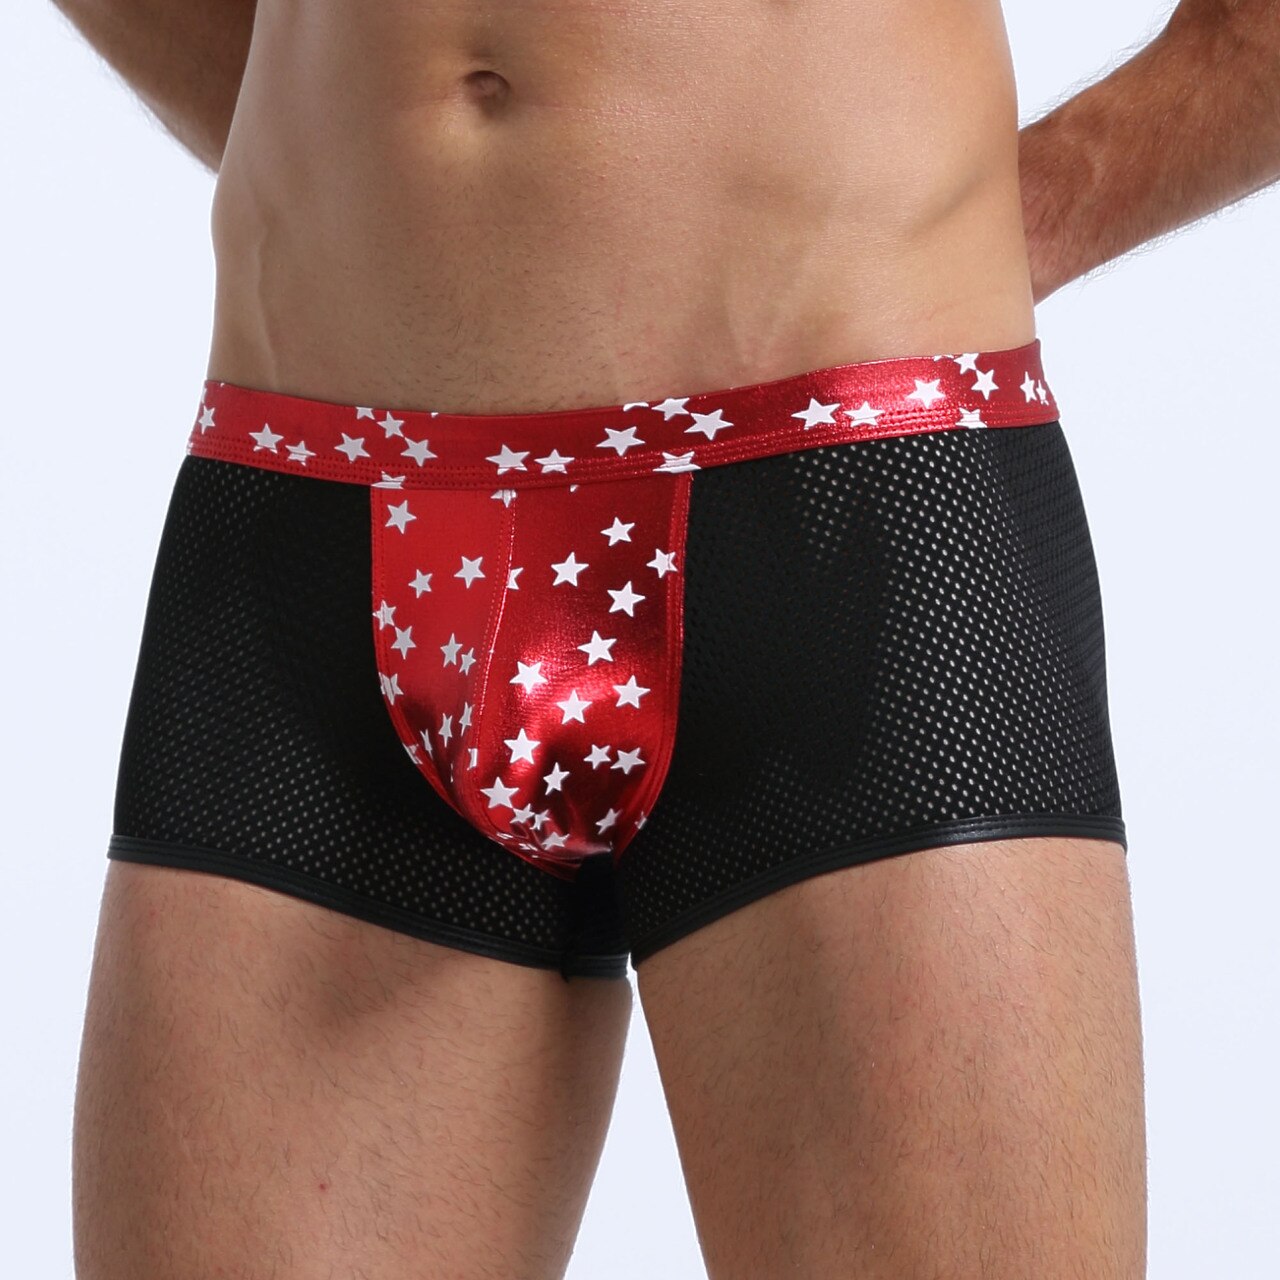 SALE - Mens Super Stars Shiny Metallic and Net Boxer Shorts Red and Black